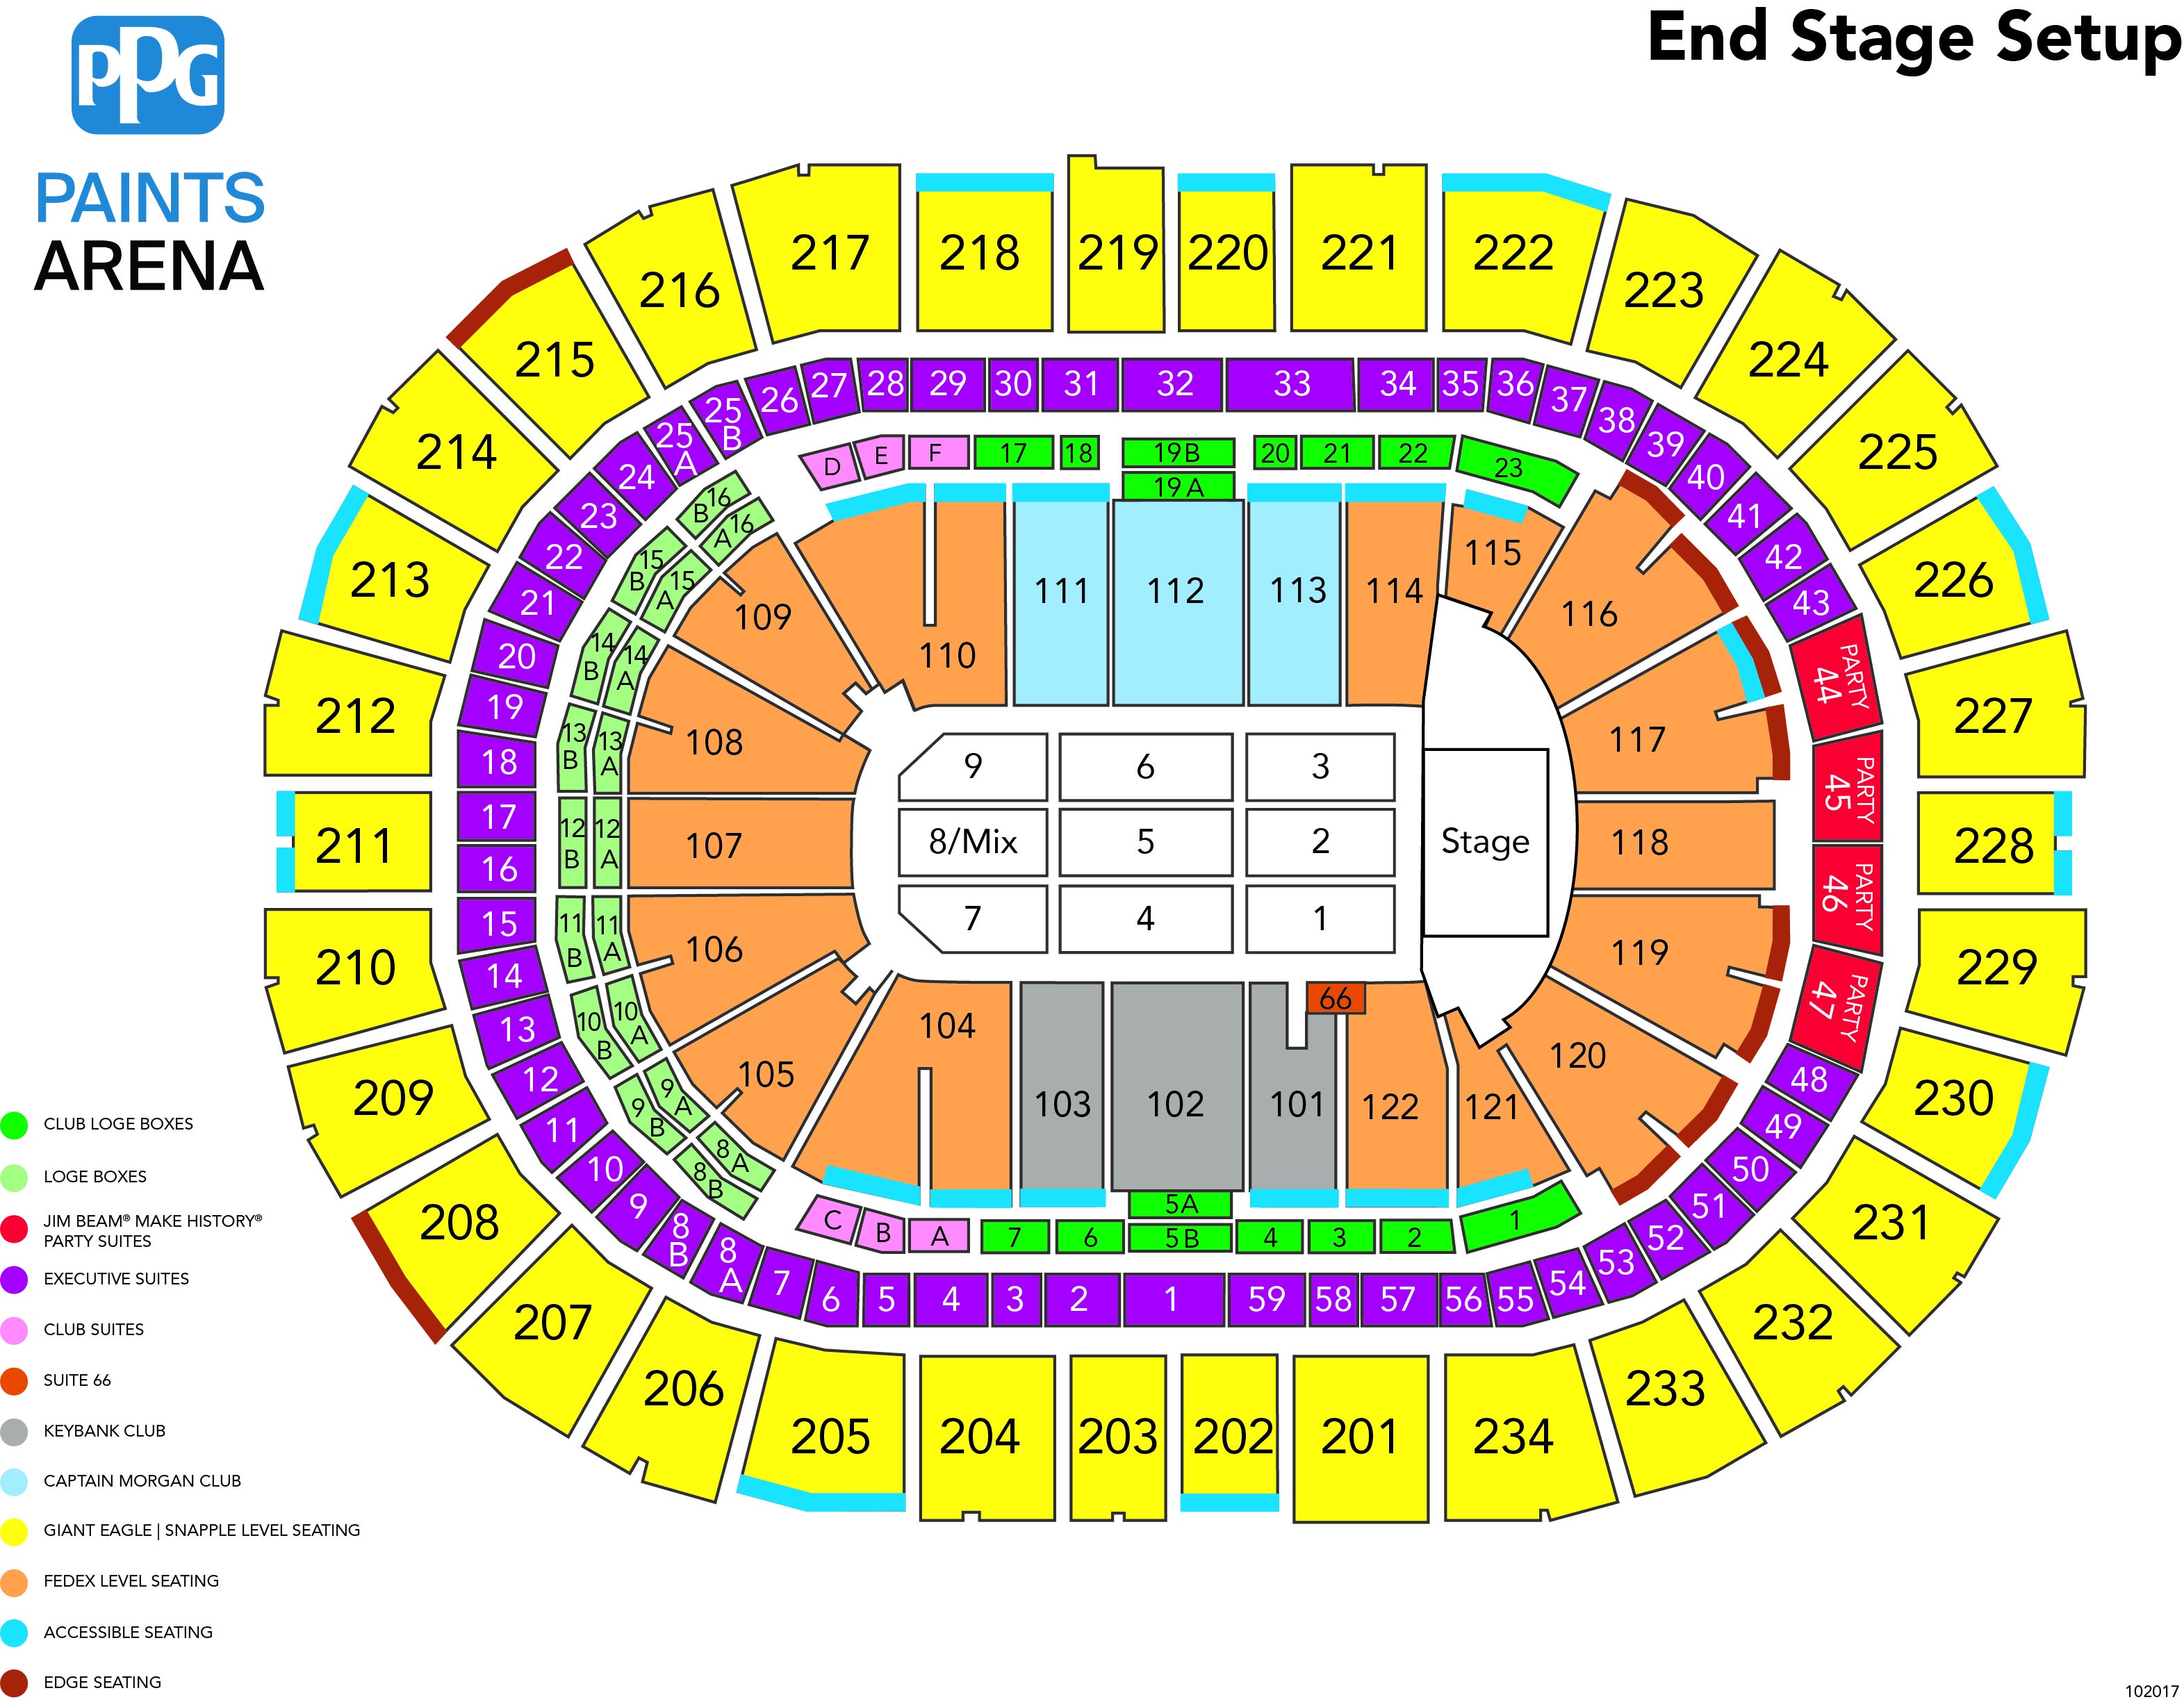 PPG Paints Arena Tickets & Seating Chart - ETC